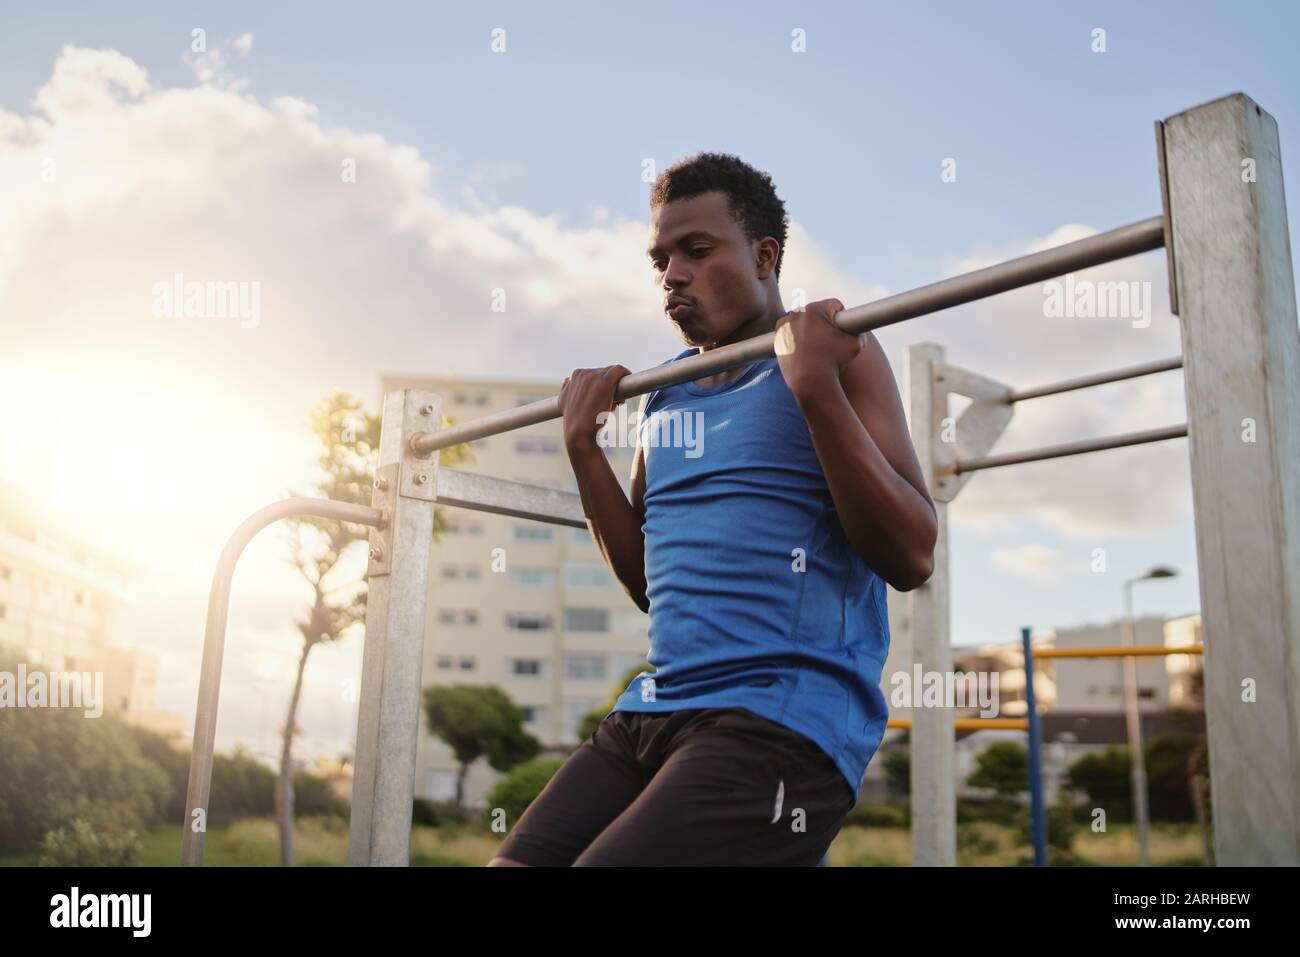 An african american young fit man doing pull ups on horizontal bar in the public park outdoors Stock Photo